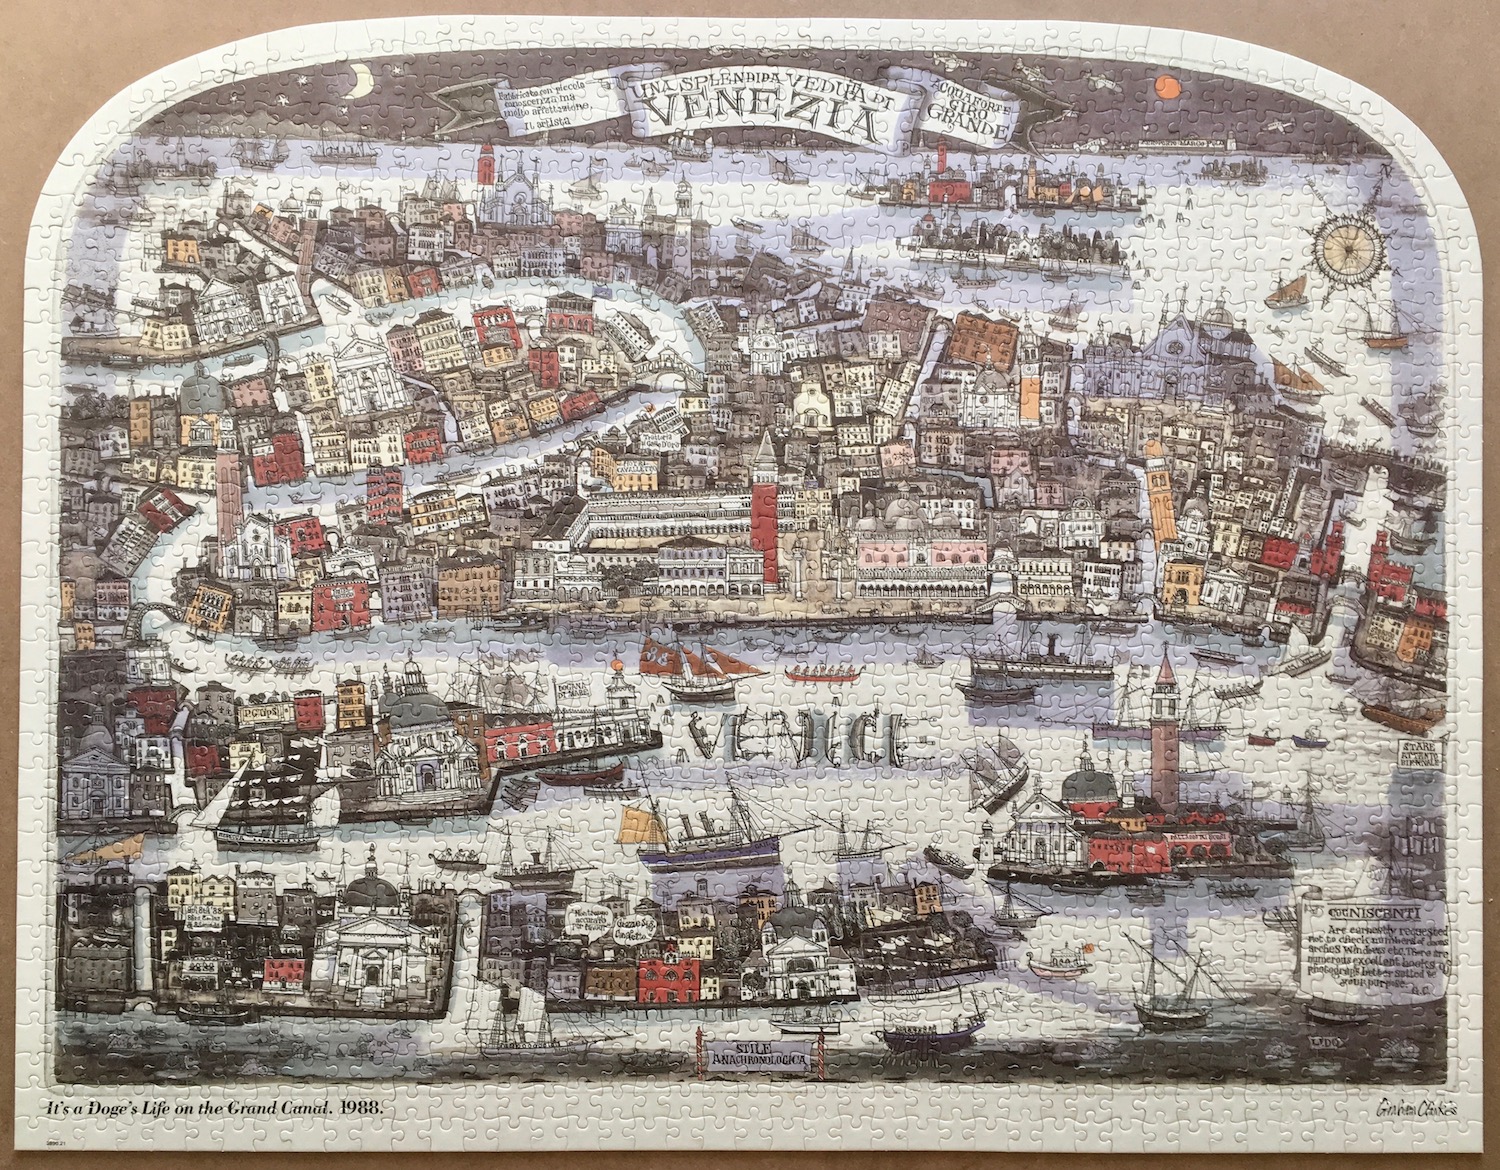 1500, MB, Its a Doges Life on the Grand Canal, Blog Post, Picture of the puzzle assembled